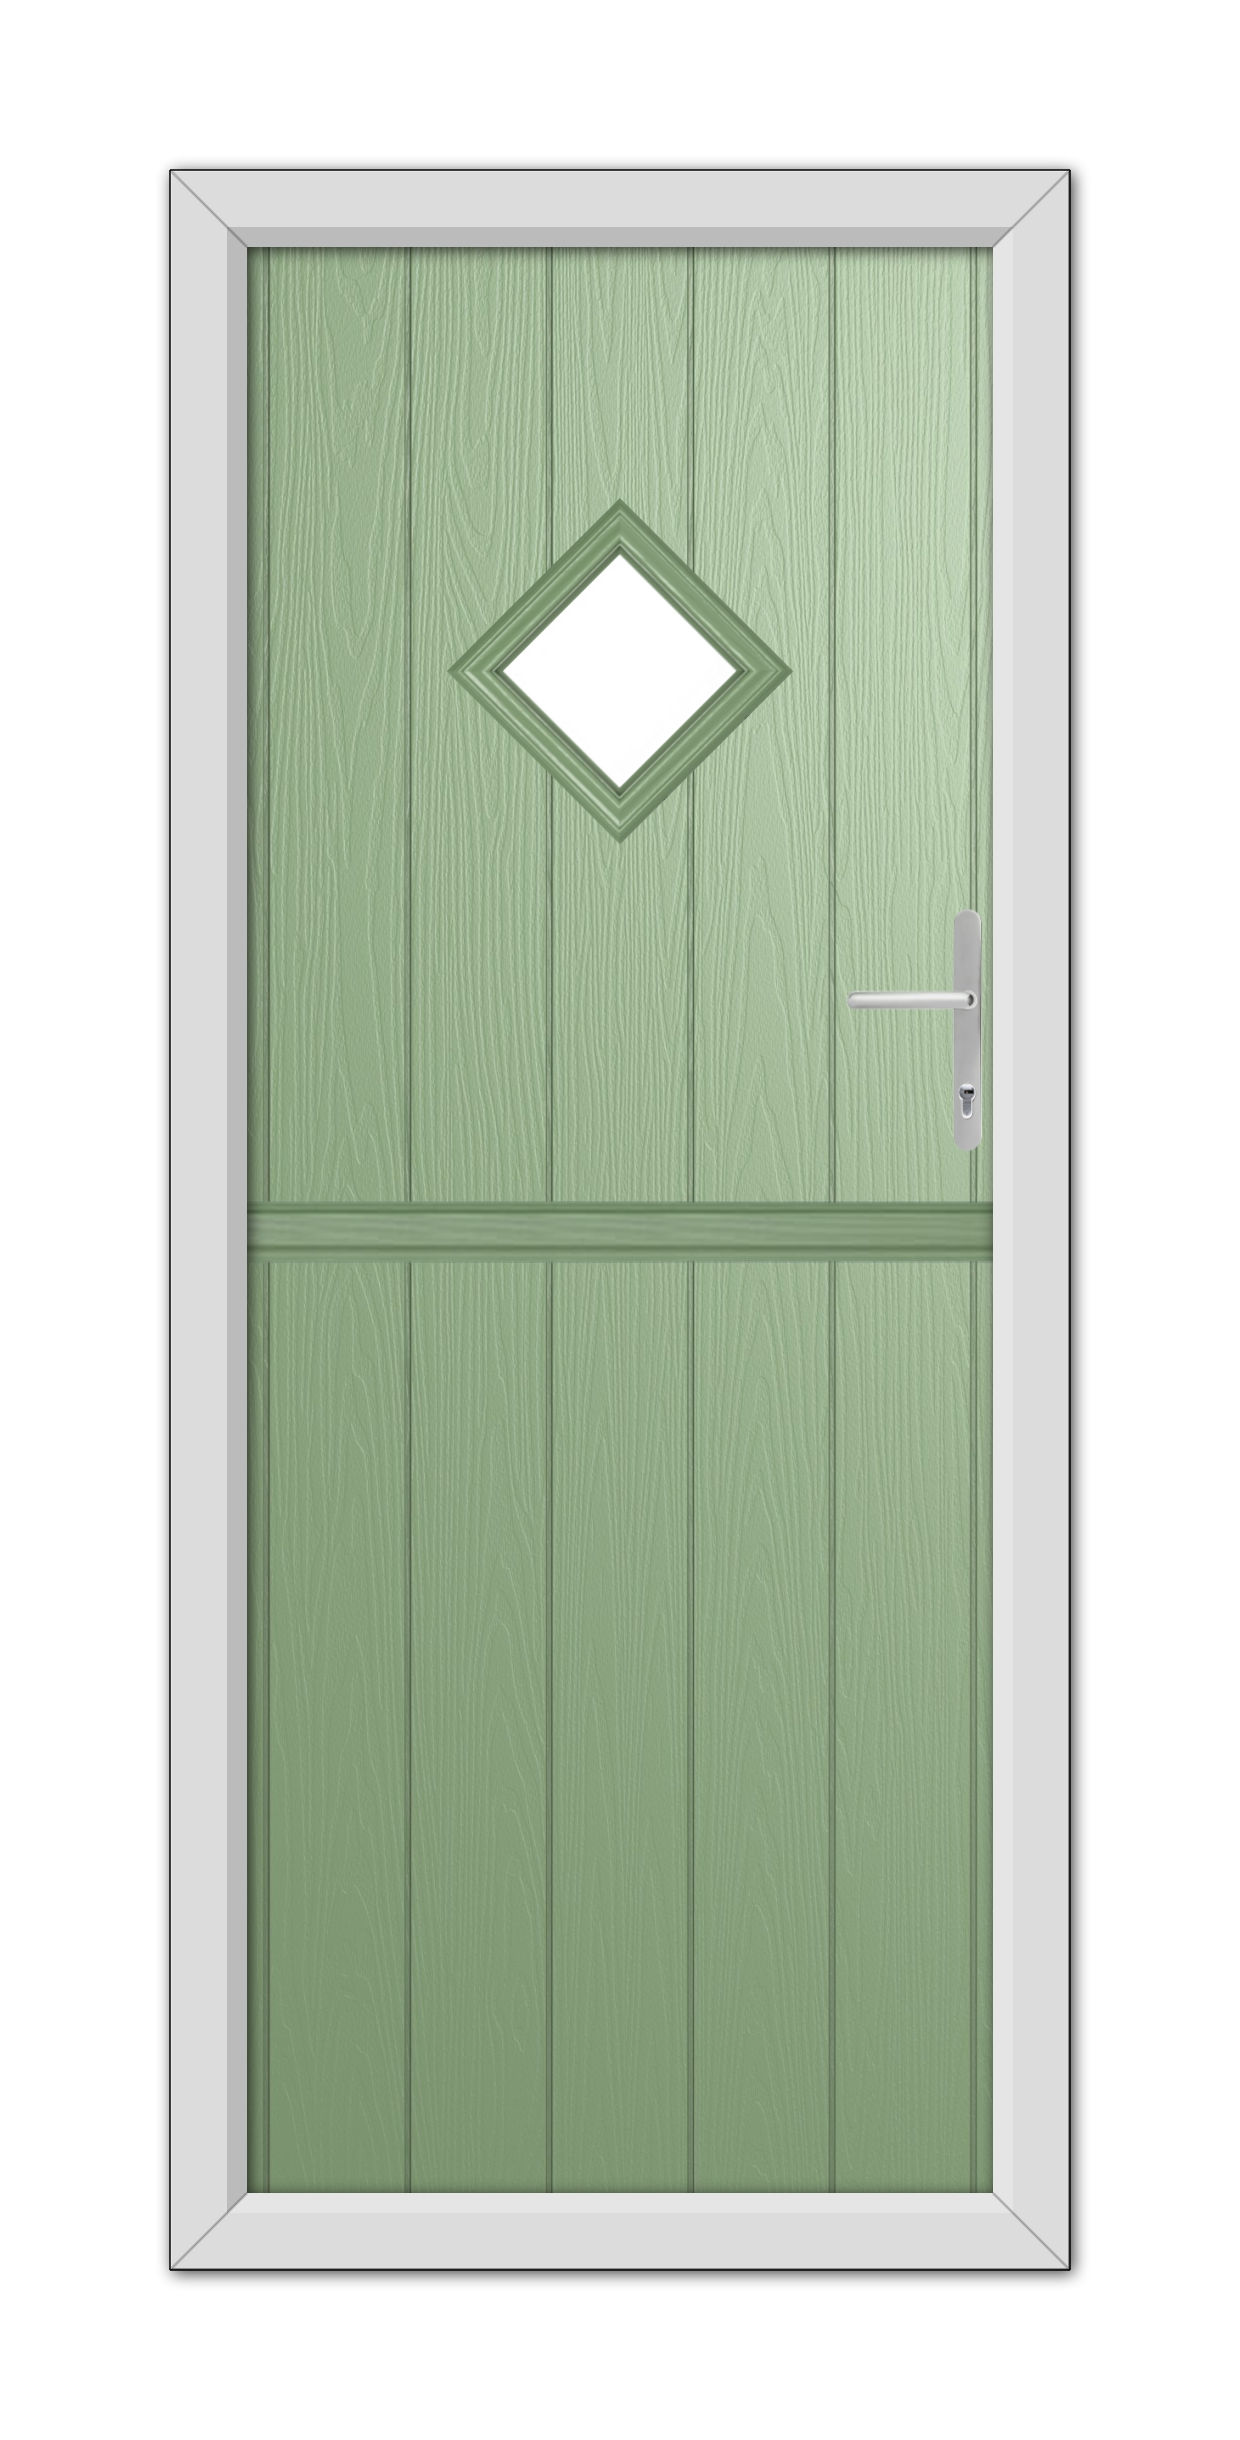 A modern Chartwell Green Cornwall Stable Composite Door featuring a diamond-shaped window at the top and a metallic handle on the right.